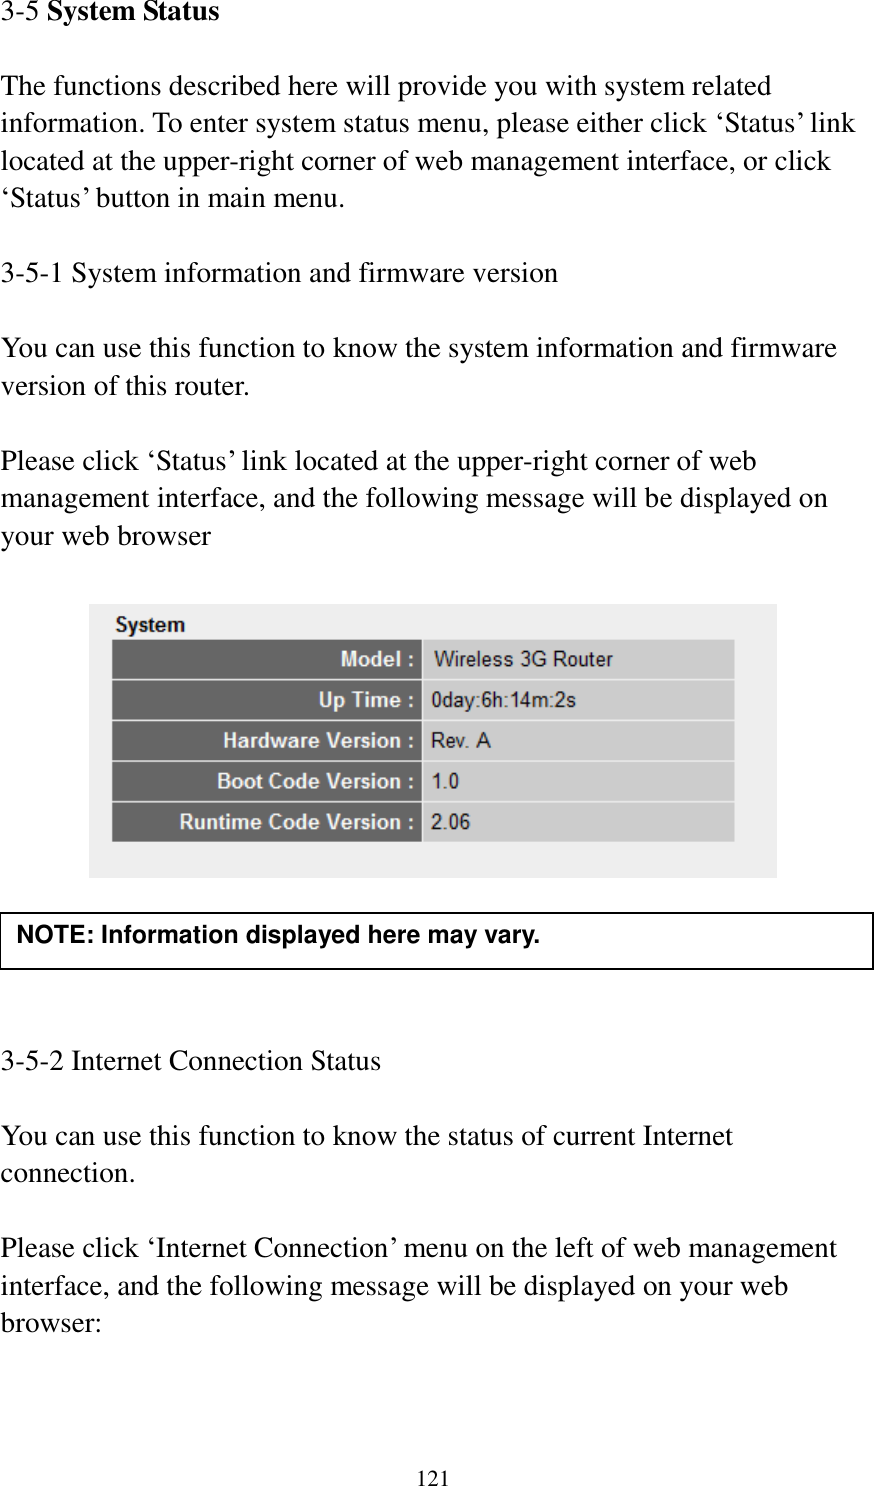 121 3-5 System Status  The functions described here will provide you with system related information. To enter system status menu, please either click „Status‟ link located at the upper-right corner of web management interface, or click „Status‟ button in main menu.  3-5-1 System information and firmware version  You can use this function to know the system information and firmware version of this router.  Please click „Status‟ link located at the upper-right corner of web management interface, and the following message will be displayed on your web browser       3-5-2 Internet Connection Status  You can use this function to know the status of current Internet connection.  Please click „Internet Connection‟ menu on the left of web management interface, and the following message will be displayed on your web browser:  NOTE: Information displayed here may vary. 